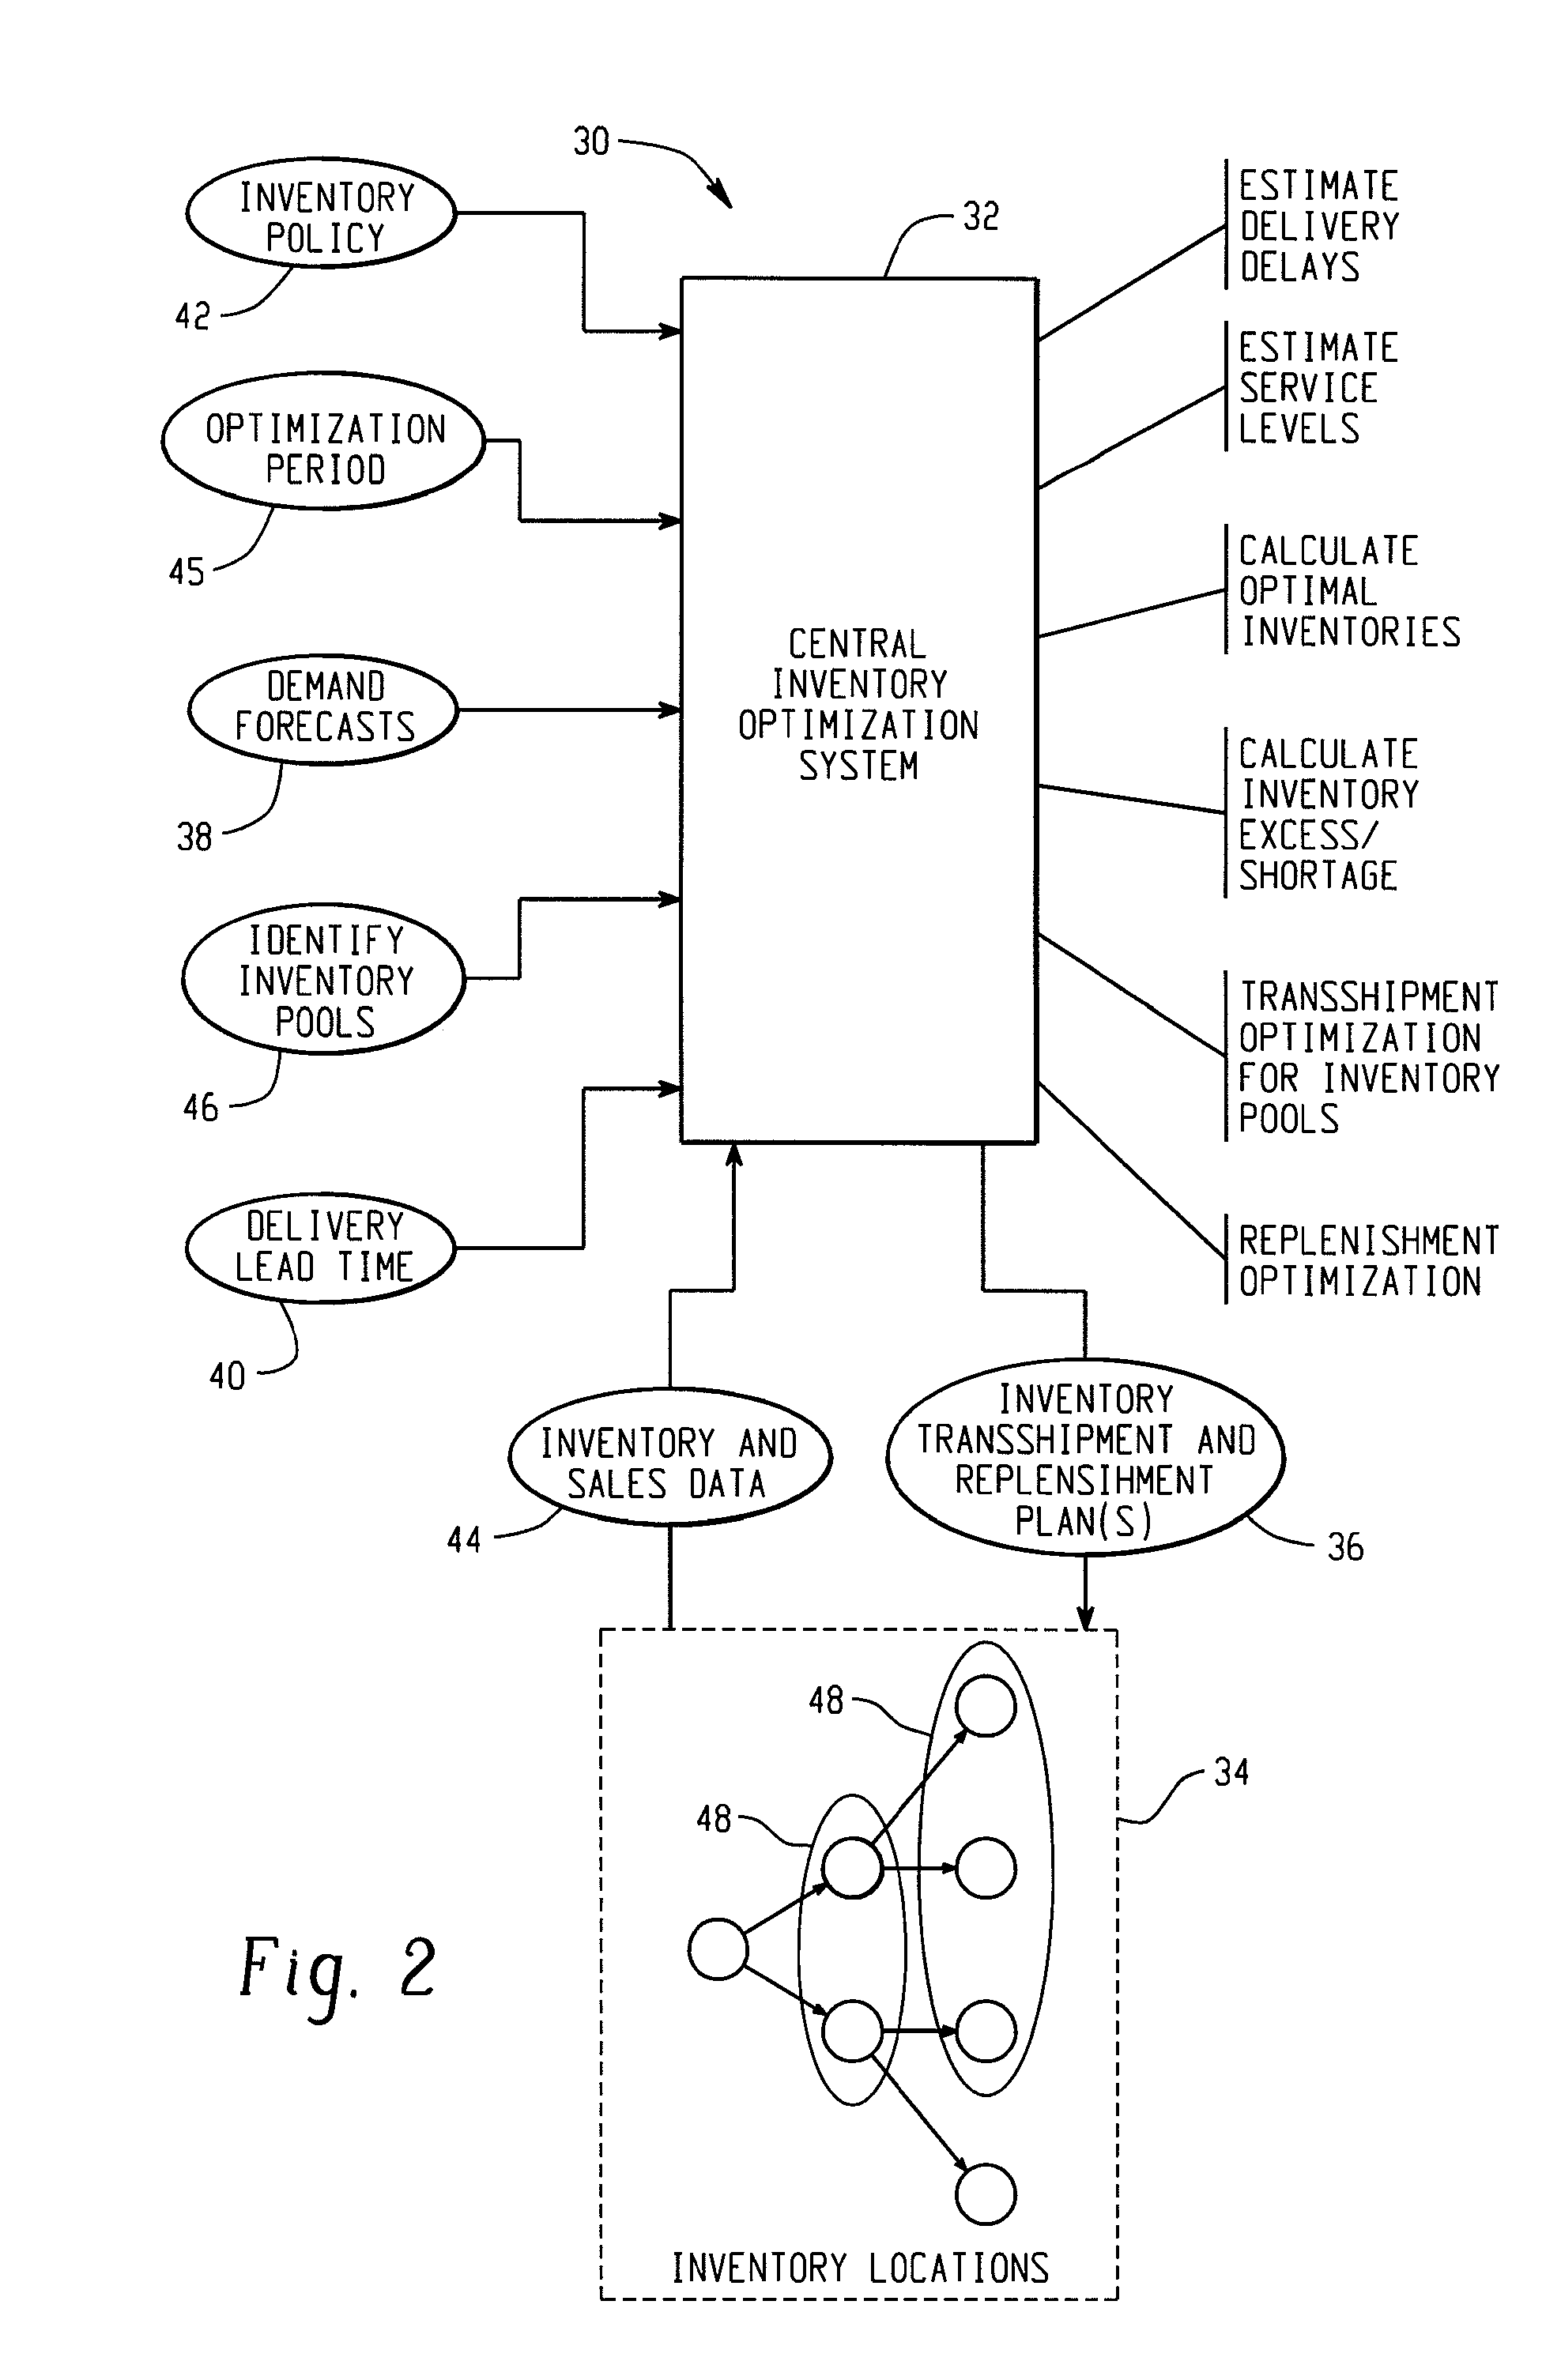 Systems And Methods For Multi-Echelon Inventory Planning With Lateral Transshipment